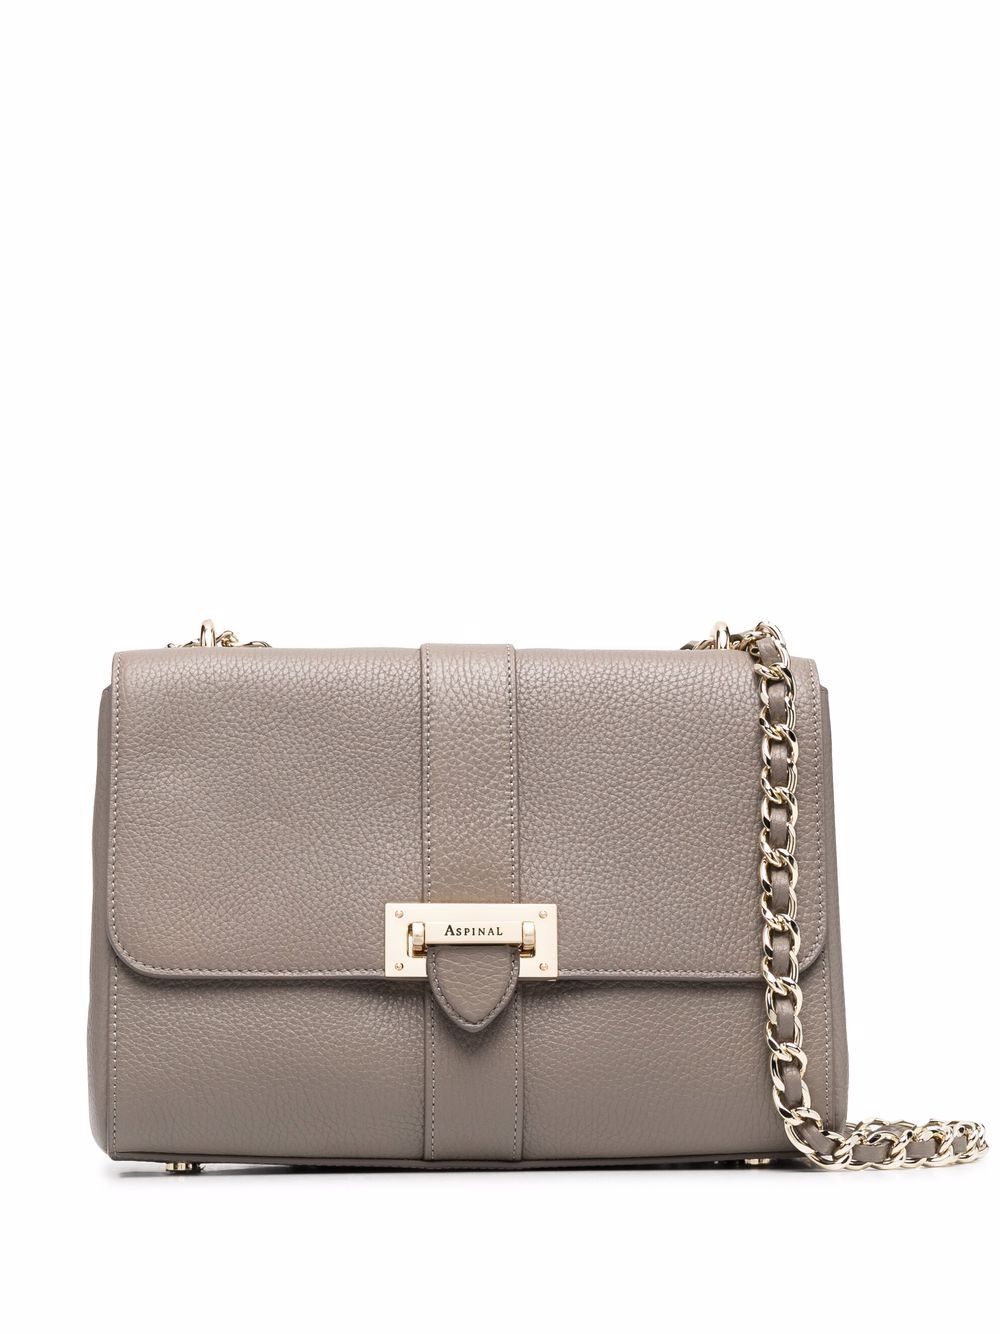 Aspinal Of London Lottie pebbled leather bag - Grey von Aspinal Of London